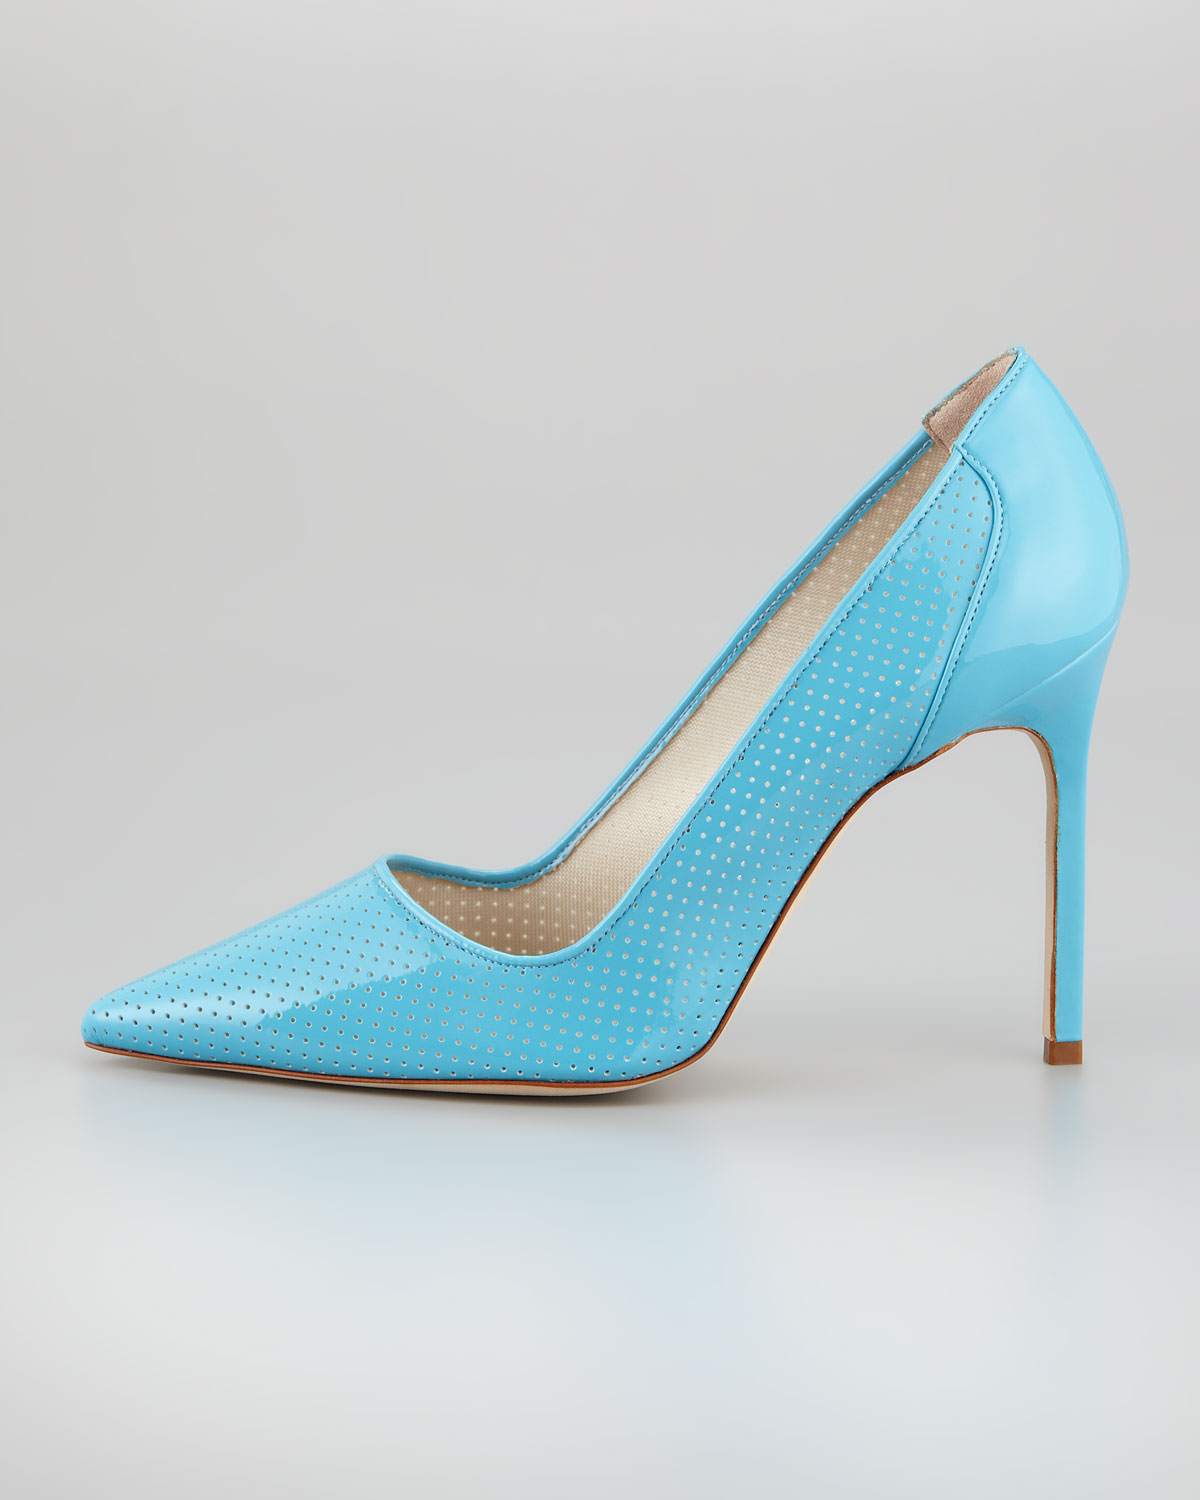 Lyst - Manolo Blahnik Bb Perforated Patent Pump in Blue